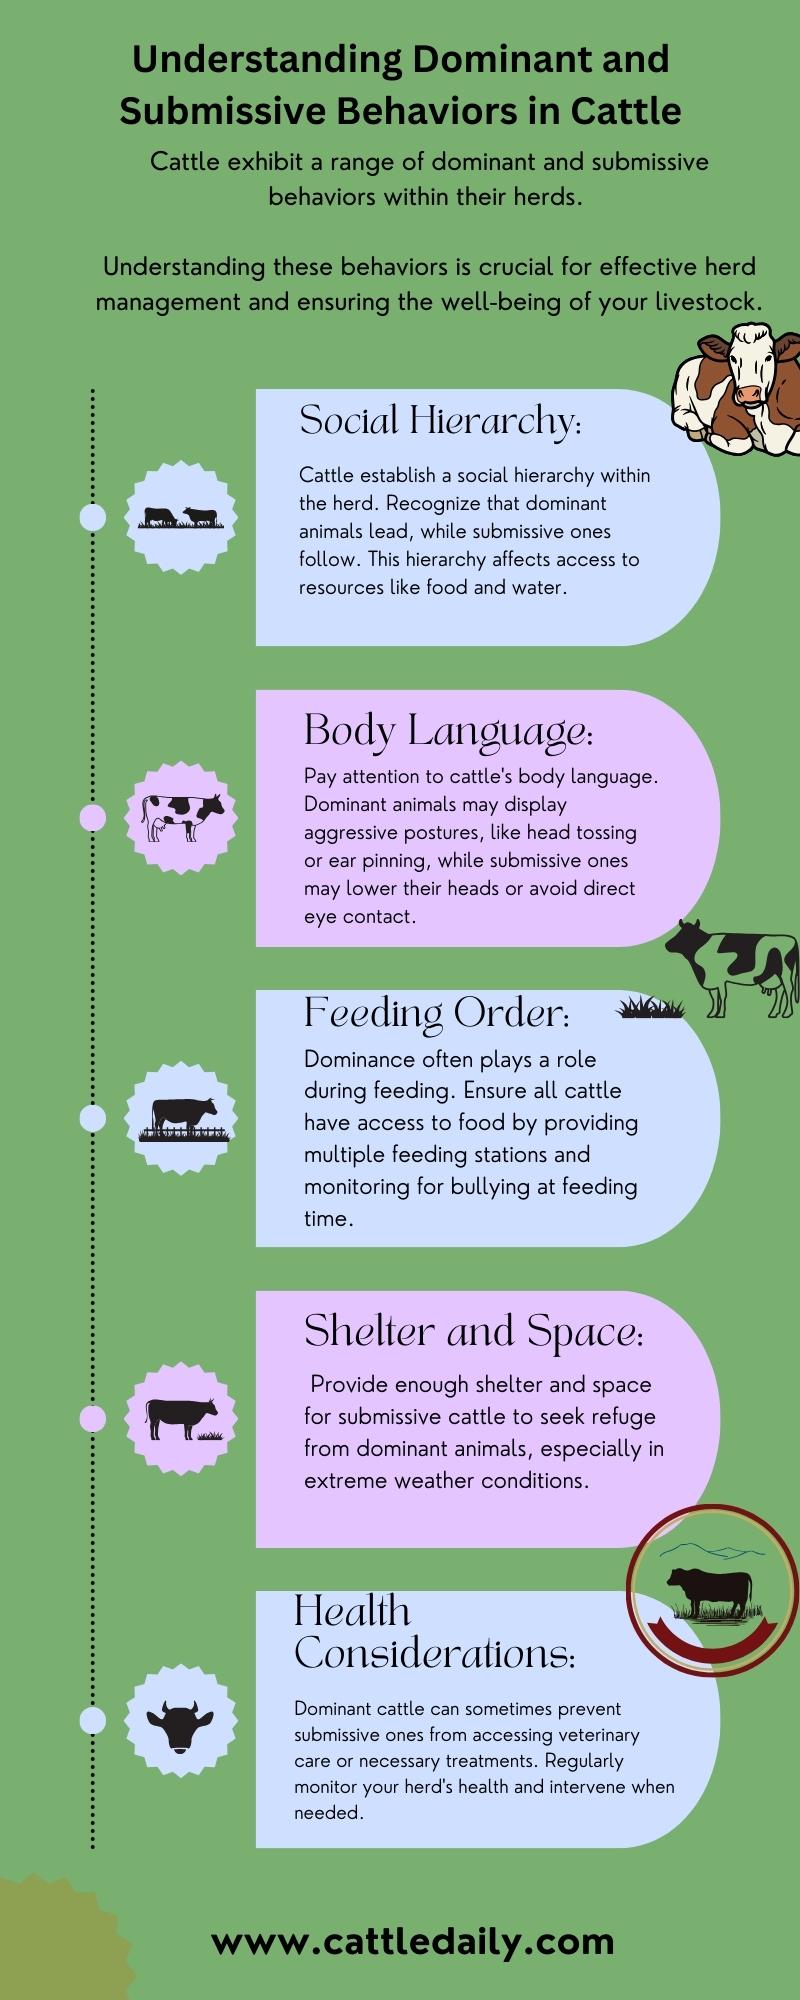 Understanding Dominant and Submissive Behaviors in Cattle infographic